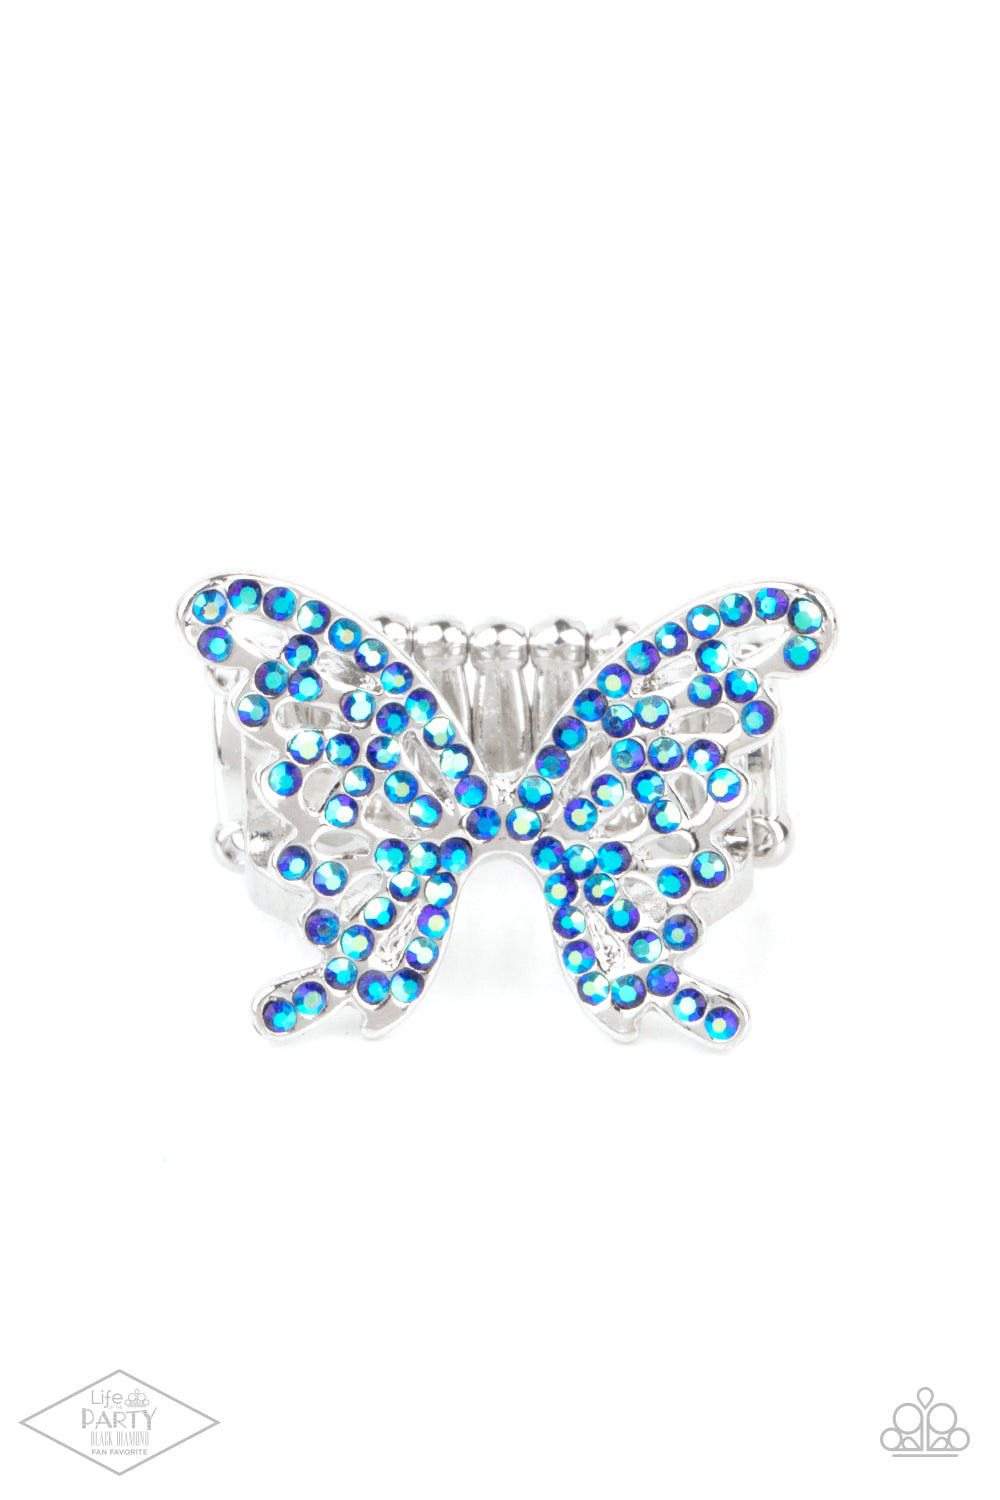 Butterfly Orchard Blue Ring - Paparazzi Accessories  Featuring an iridescent shimmer, dainty blue rhinestones adorn a silver butterfly atop the finger for an enchanted fashion. Features a stretchy band for a flexible fit.  Sold as one individual ring. This Fan Favorite is back in the spotlight at the request of our 2021 Life of the Party member with Black Diamond Access, Paula H.